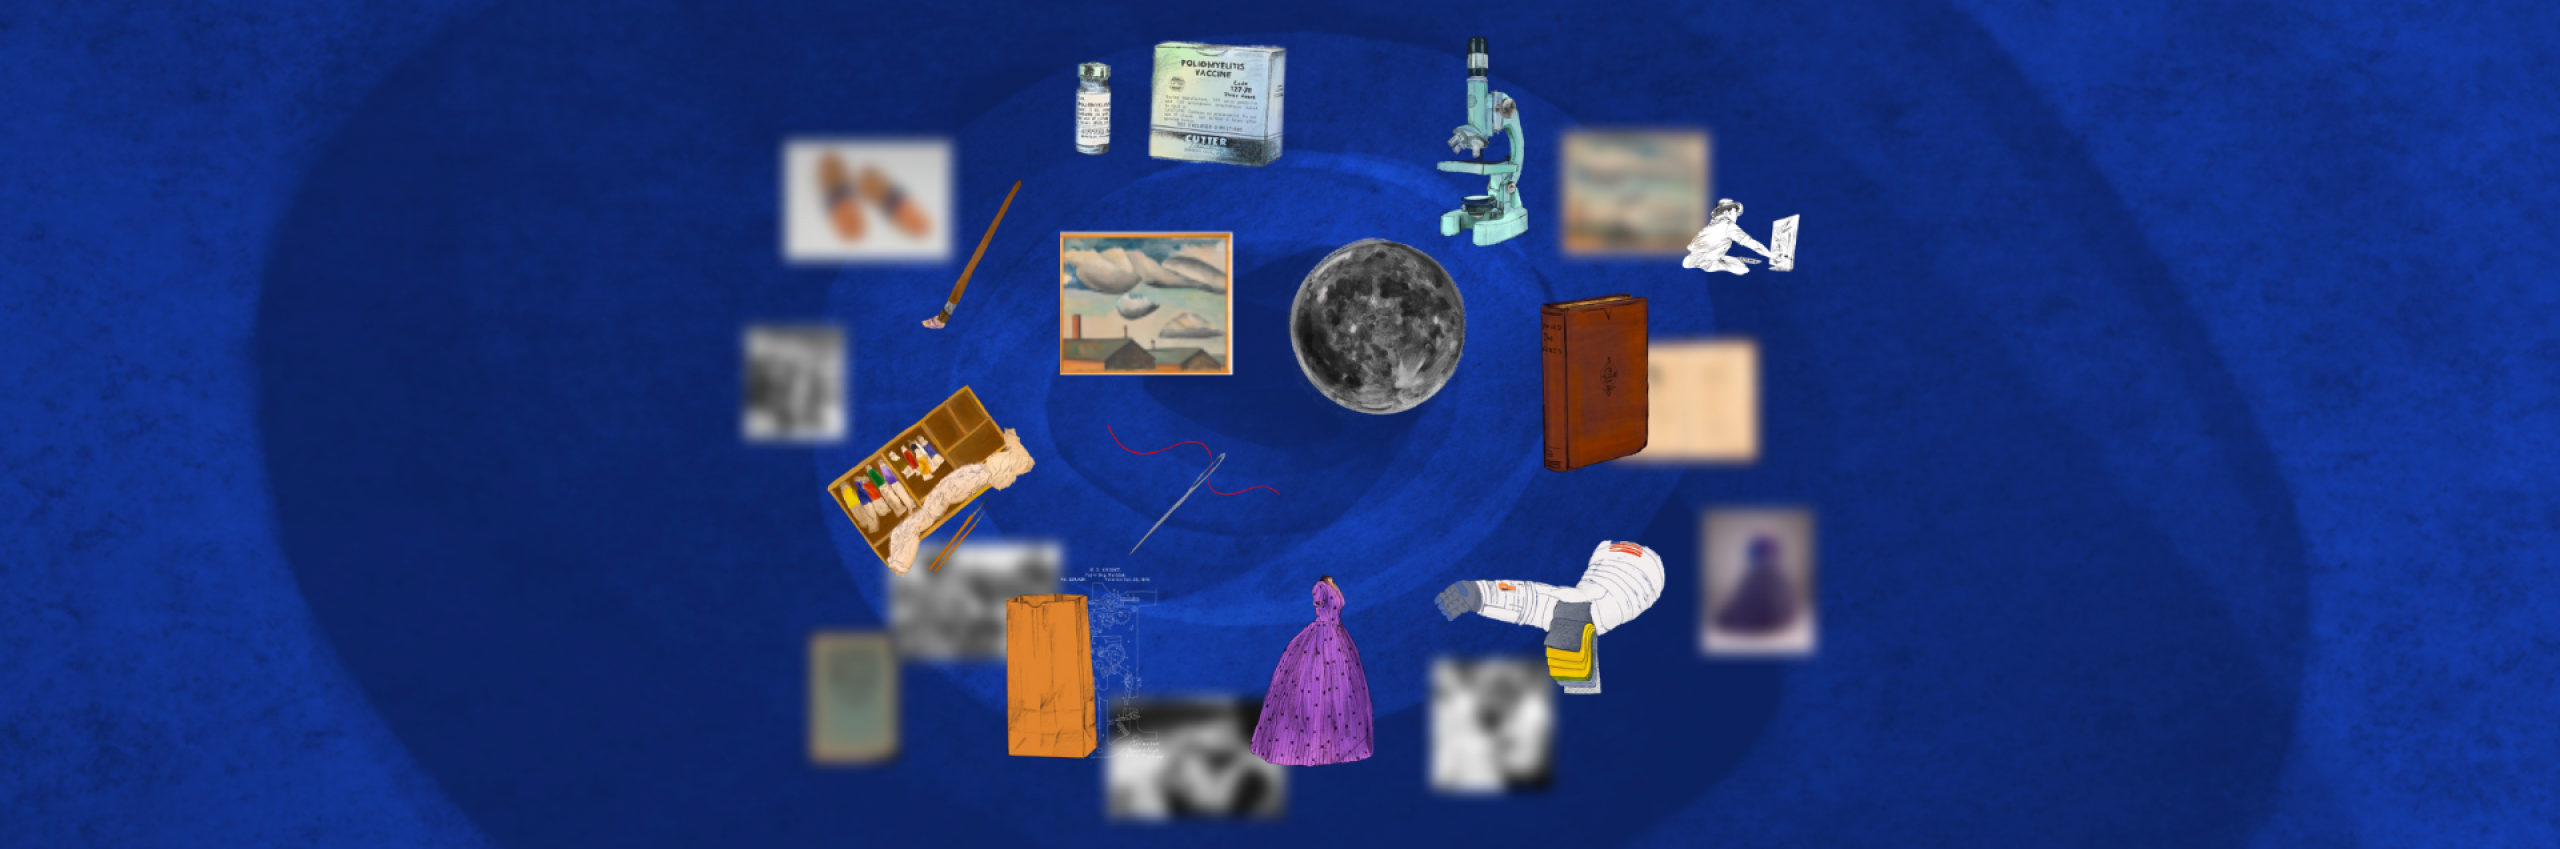 Collections objects sit on a blue background, some are fuzzy and some are clear.